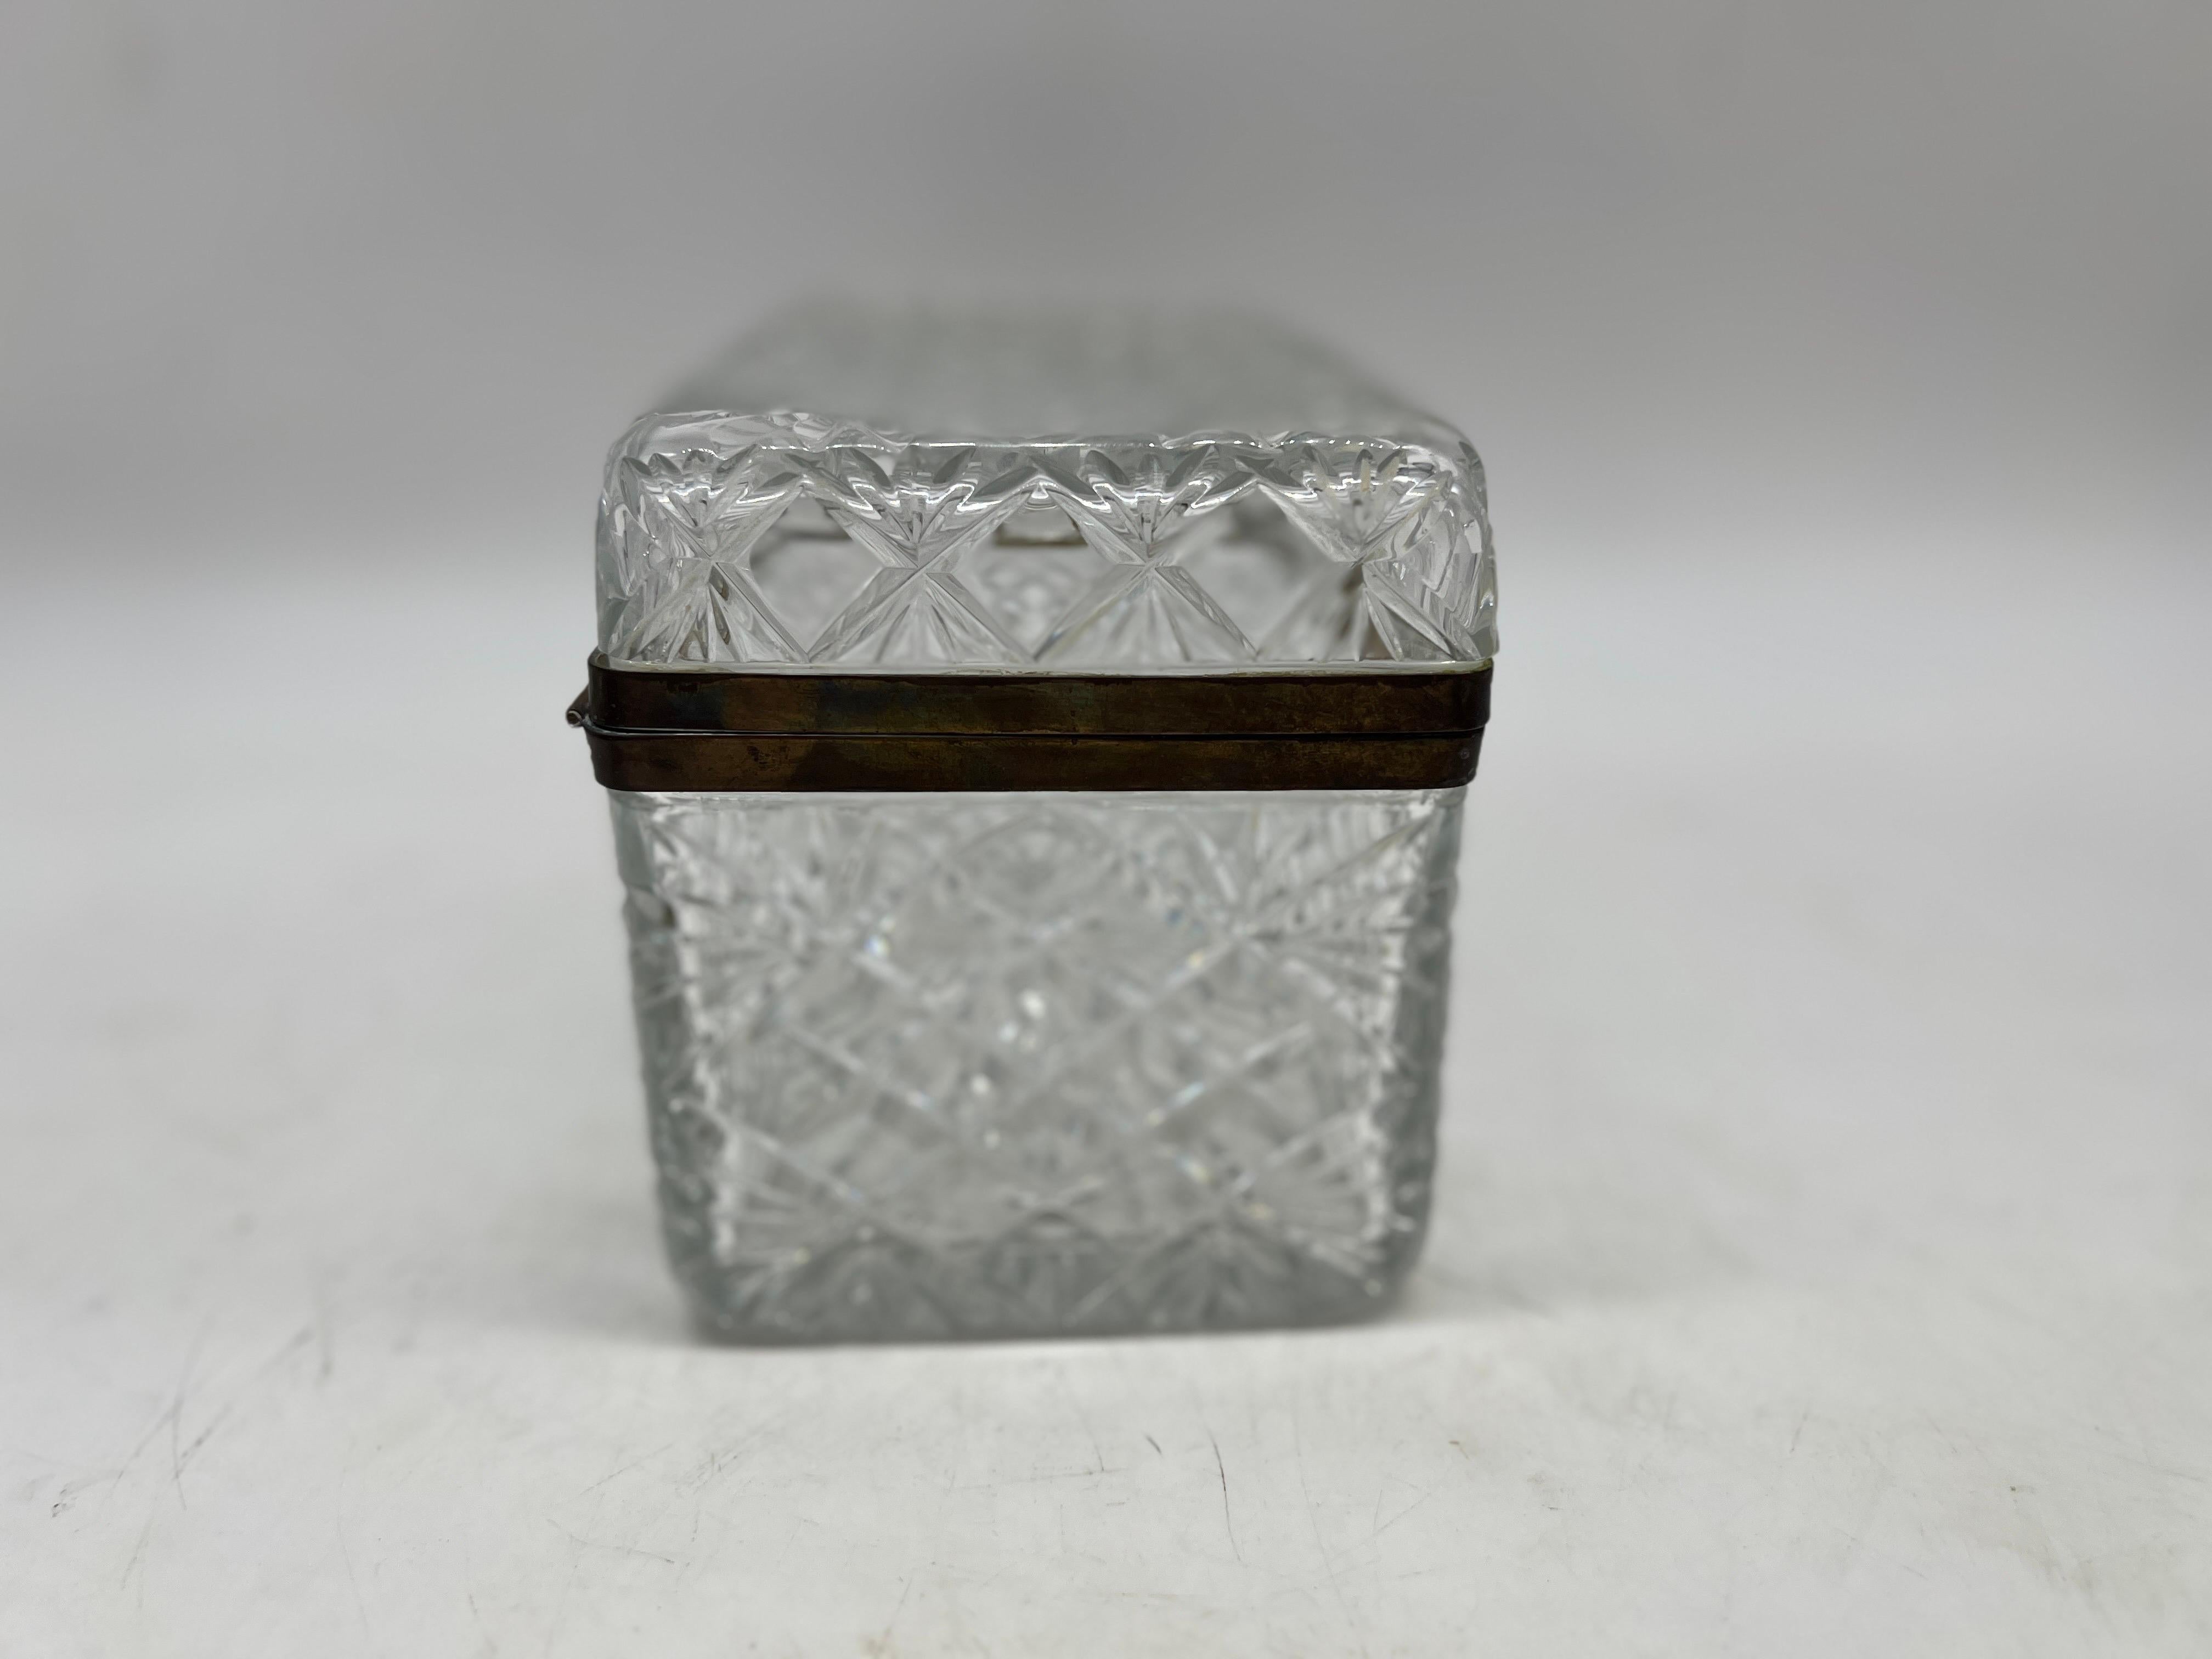 French, late 19th to early 20th century.

An antique cut crystal dresser box with ormolu mounted hinge. In the style of Baccarat.